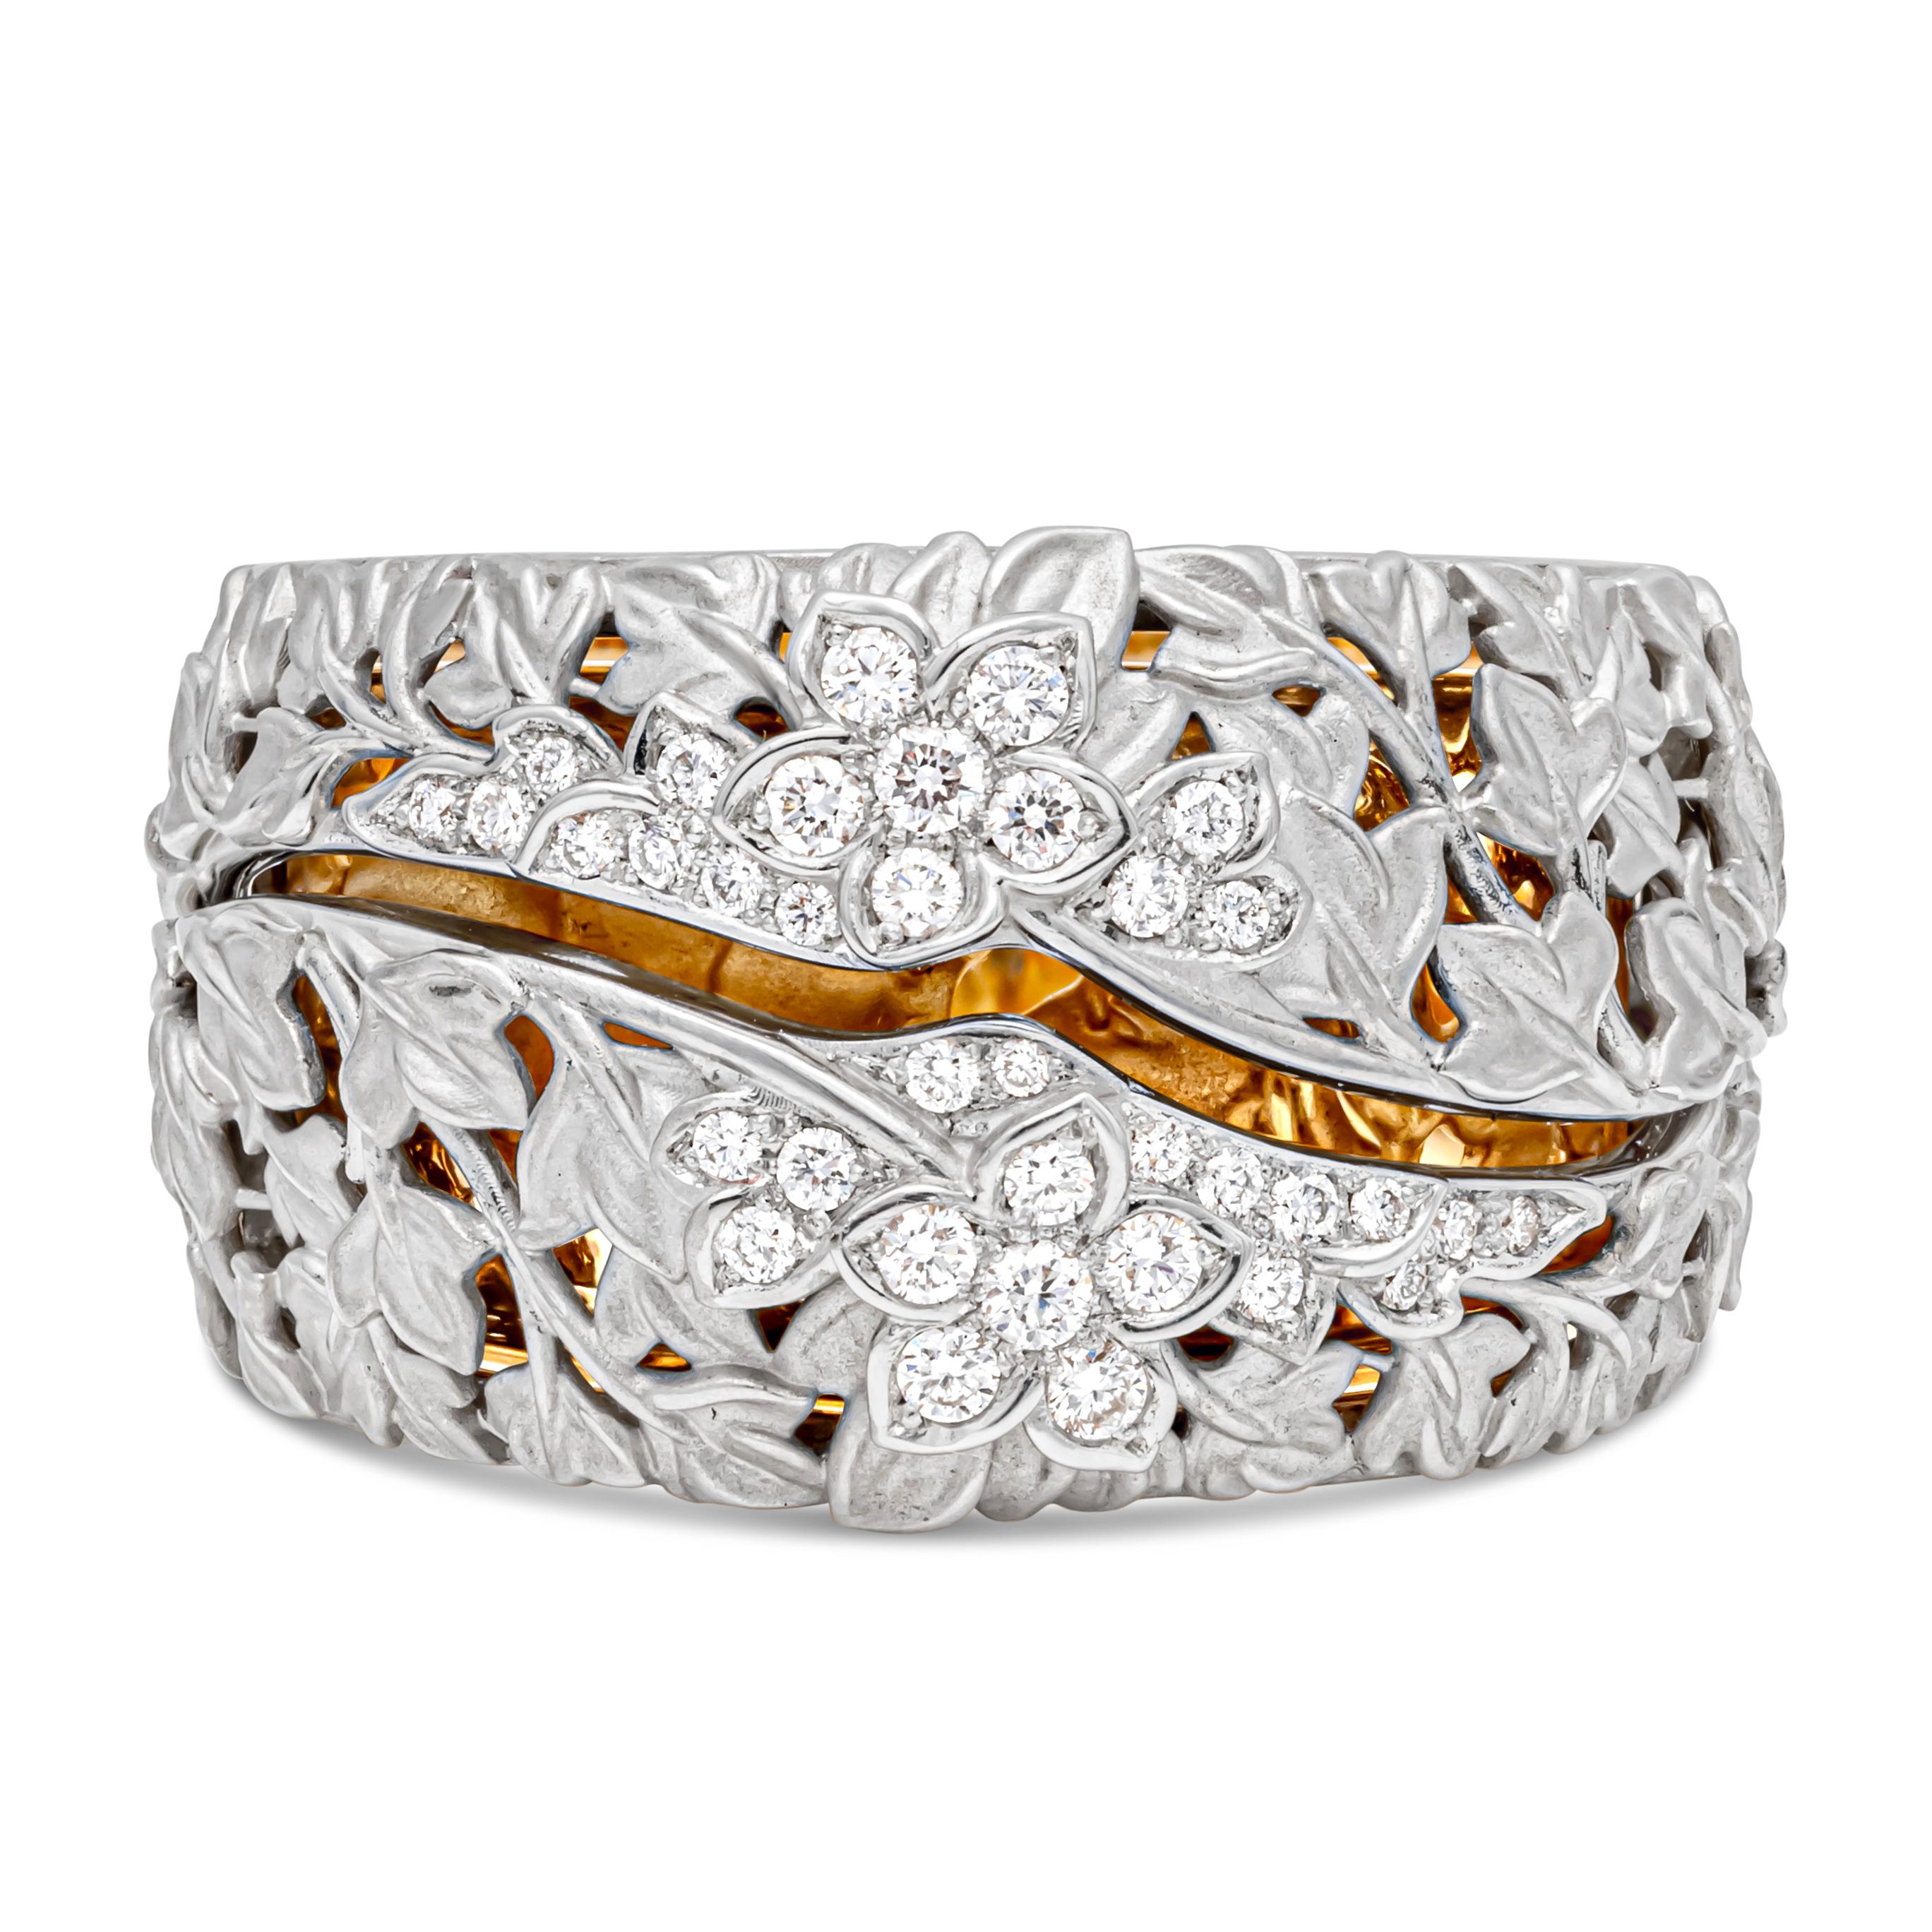 Signed piece by Carrera y Carrera, a perfect gift to yourself or to celebrate any special moment. A fashion ring that closes and opens, 18K White Gold in floral motif with 0.27 carats total diamond outside and a sculpture of Romeo & Juliet in 18K